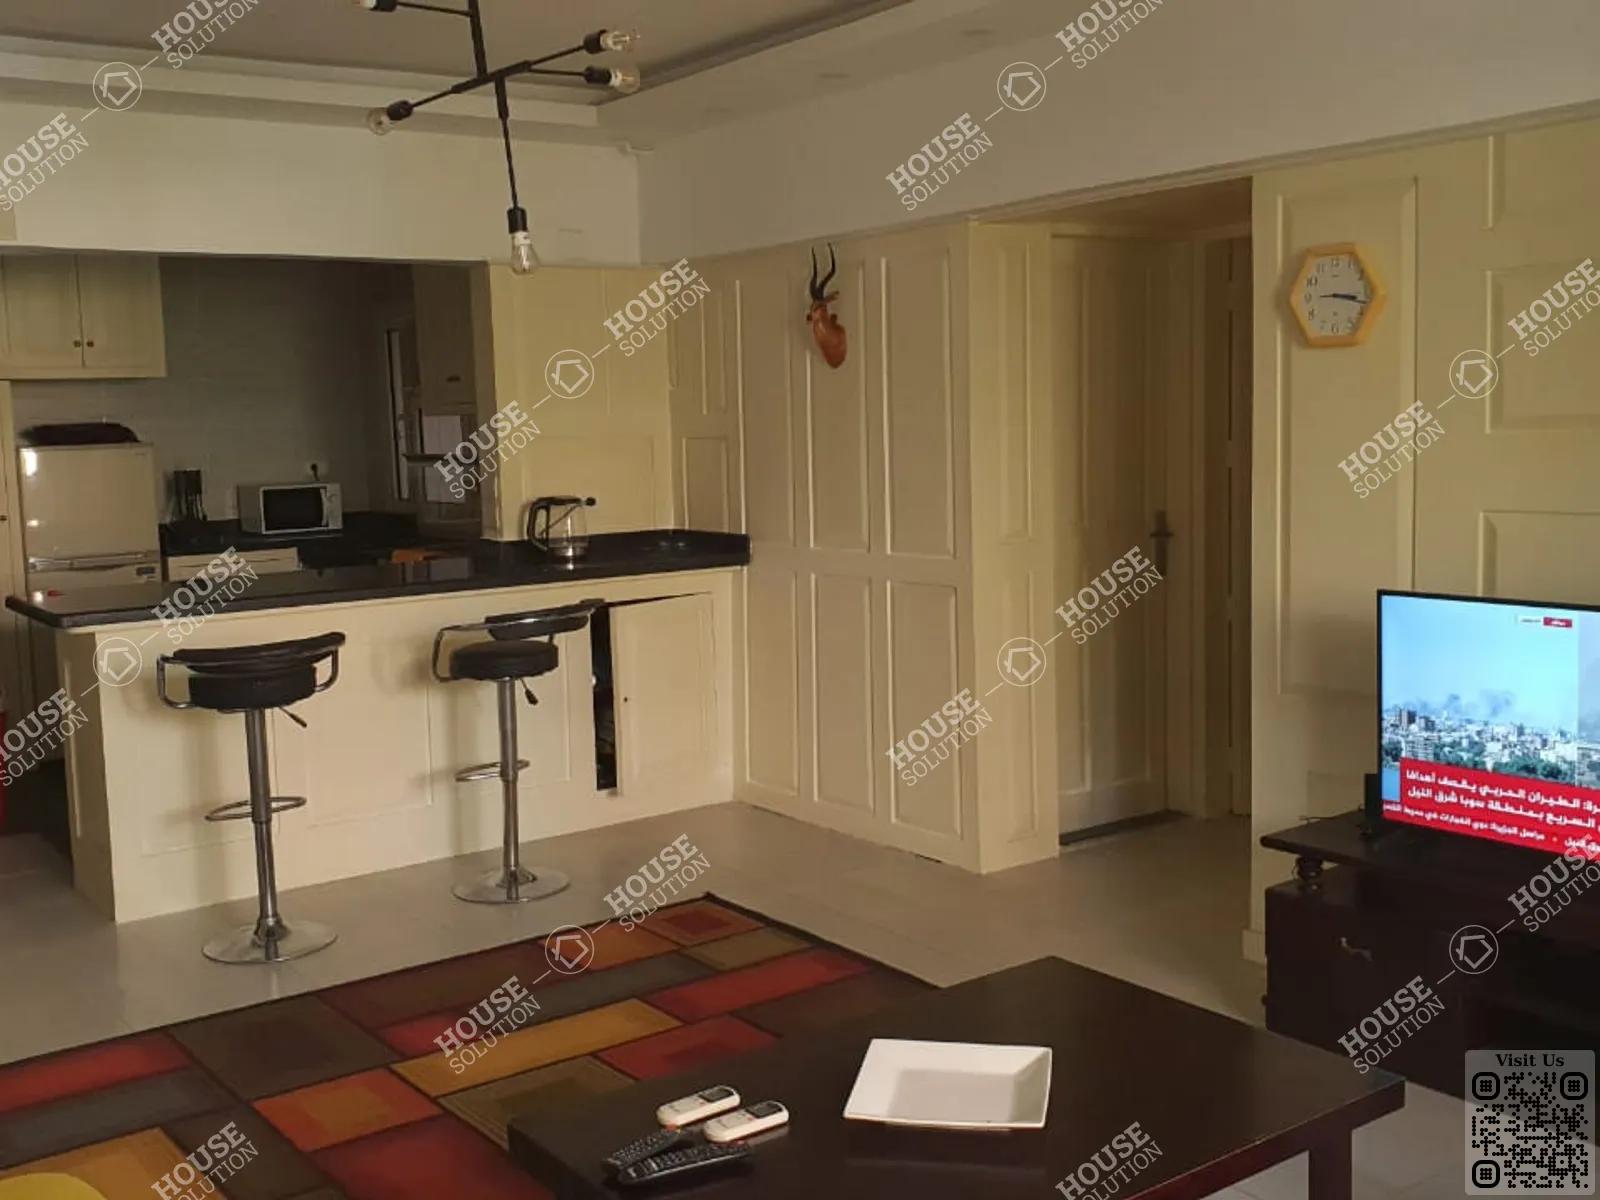 KITCHEN  @ Apartments For Rent In Maadi Maadi Degla Area: 100 m² consists of 2 Bedrooms 2 Bathrooms Furnished 5 stars #4915-2